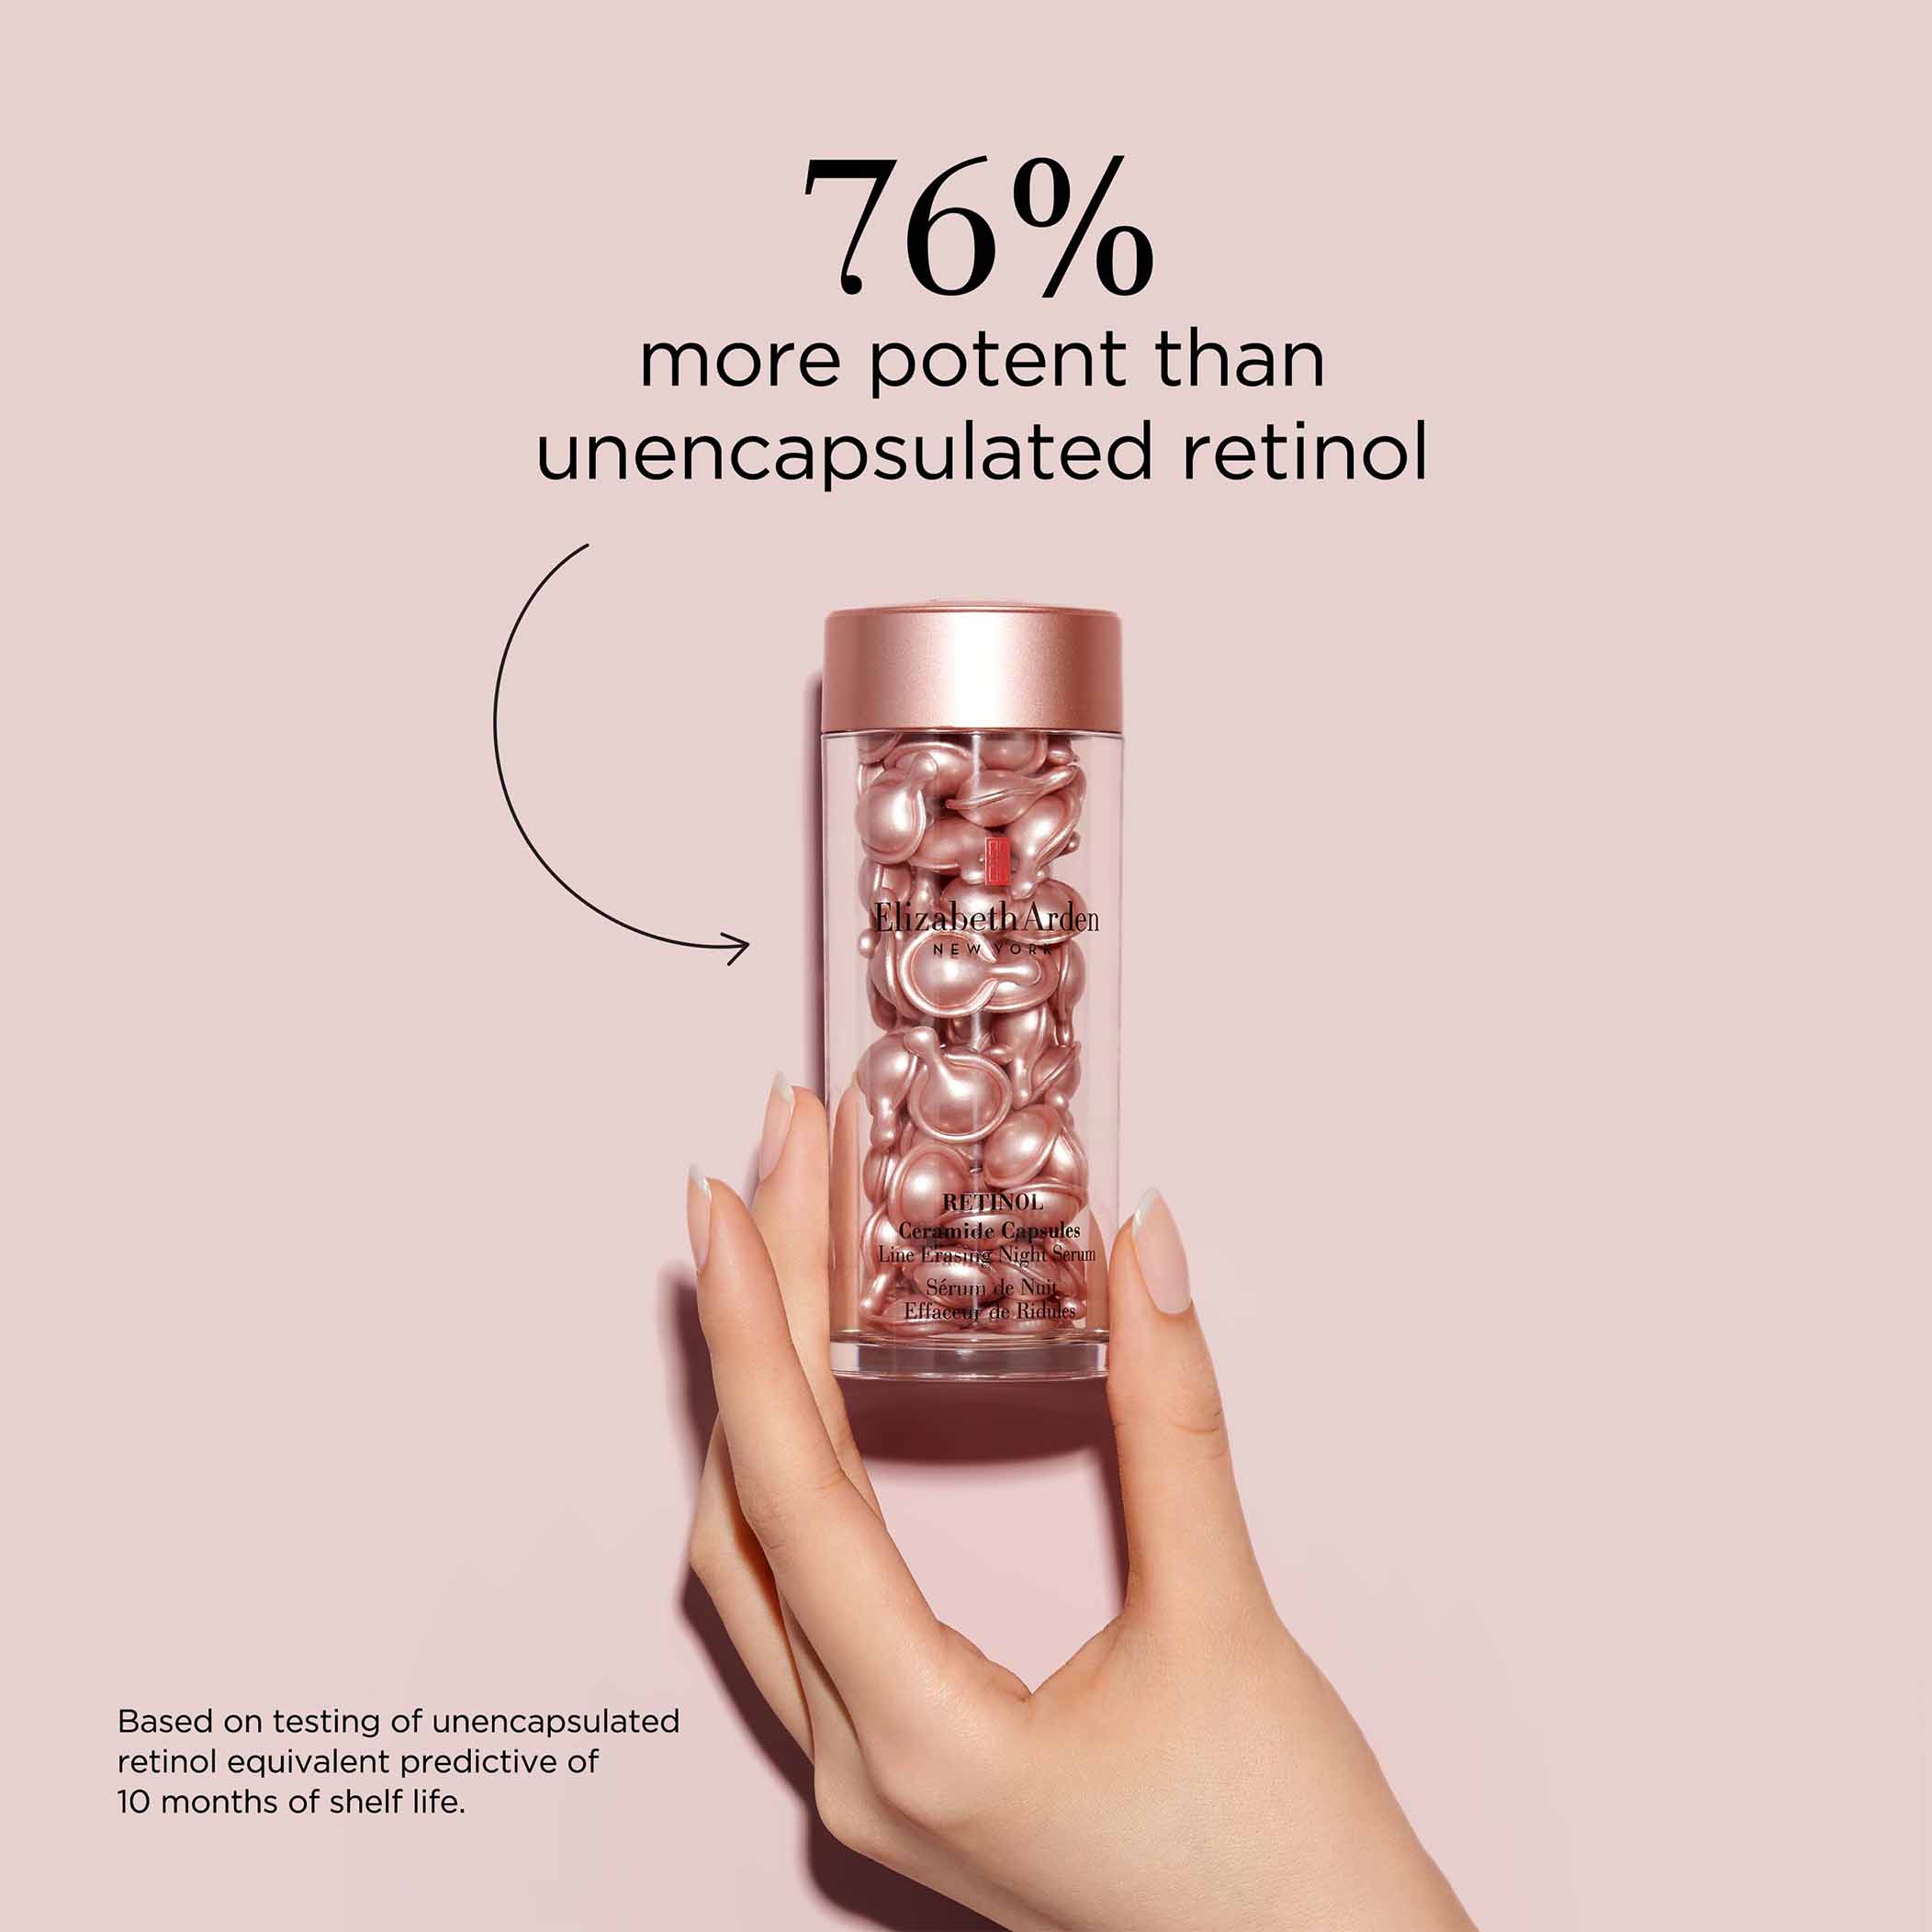 76% more potent than uncapsulated retinol based on testing of unencapsulated retinol equivalent predictive of 10 months of shelf life.